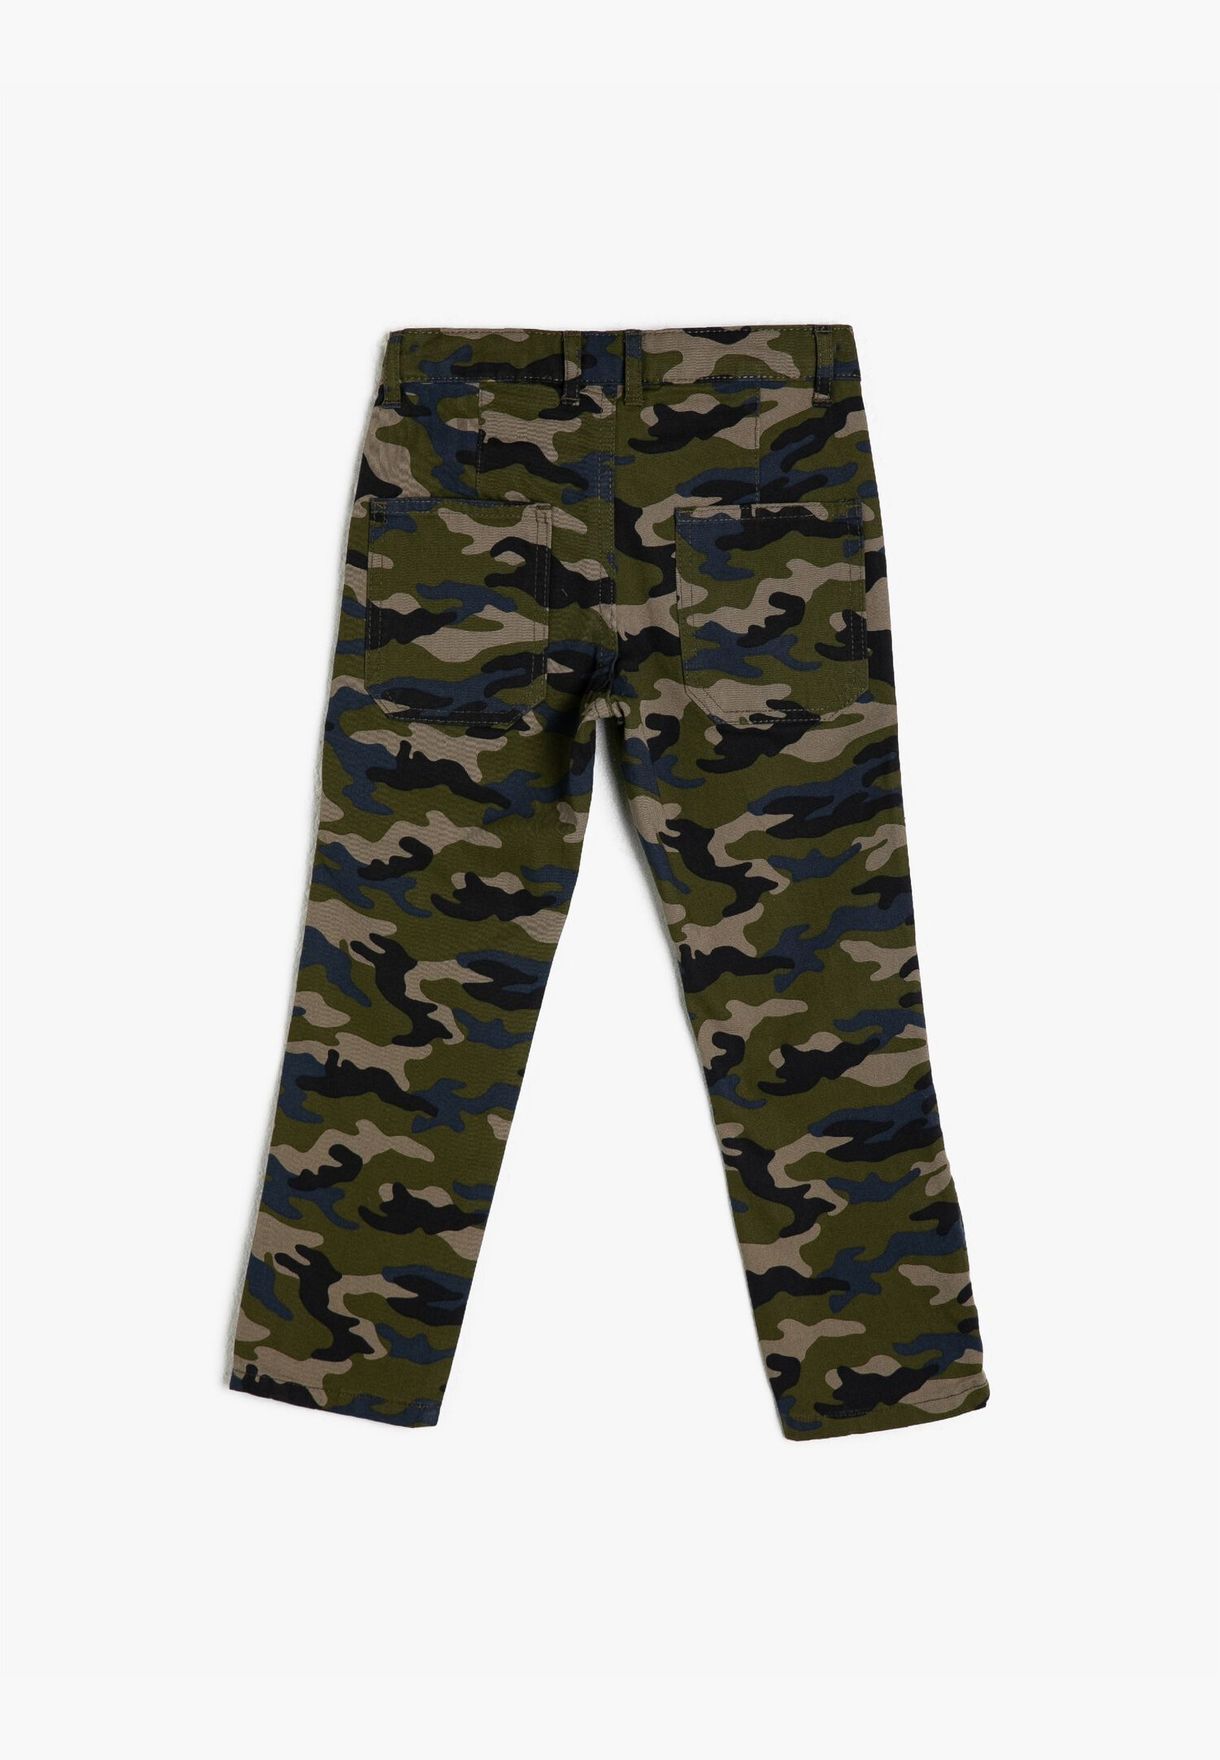  100% Cotton Camouflage Printed Trousers